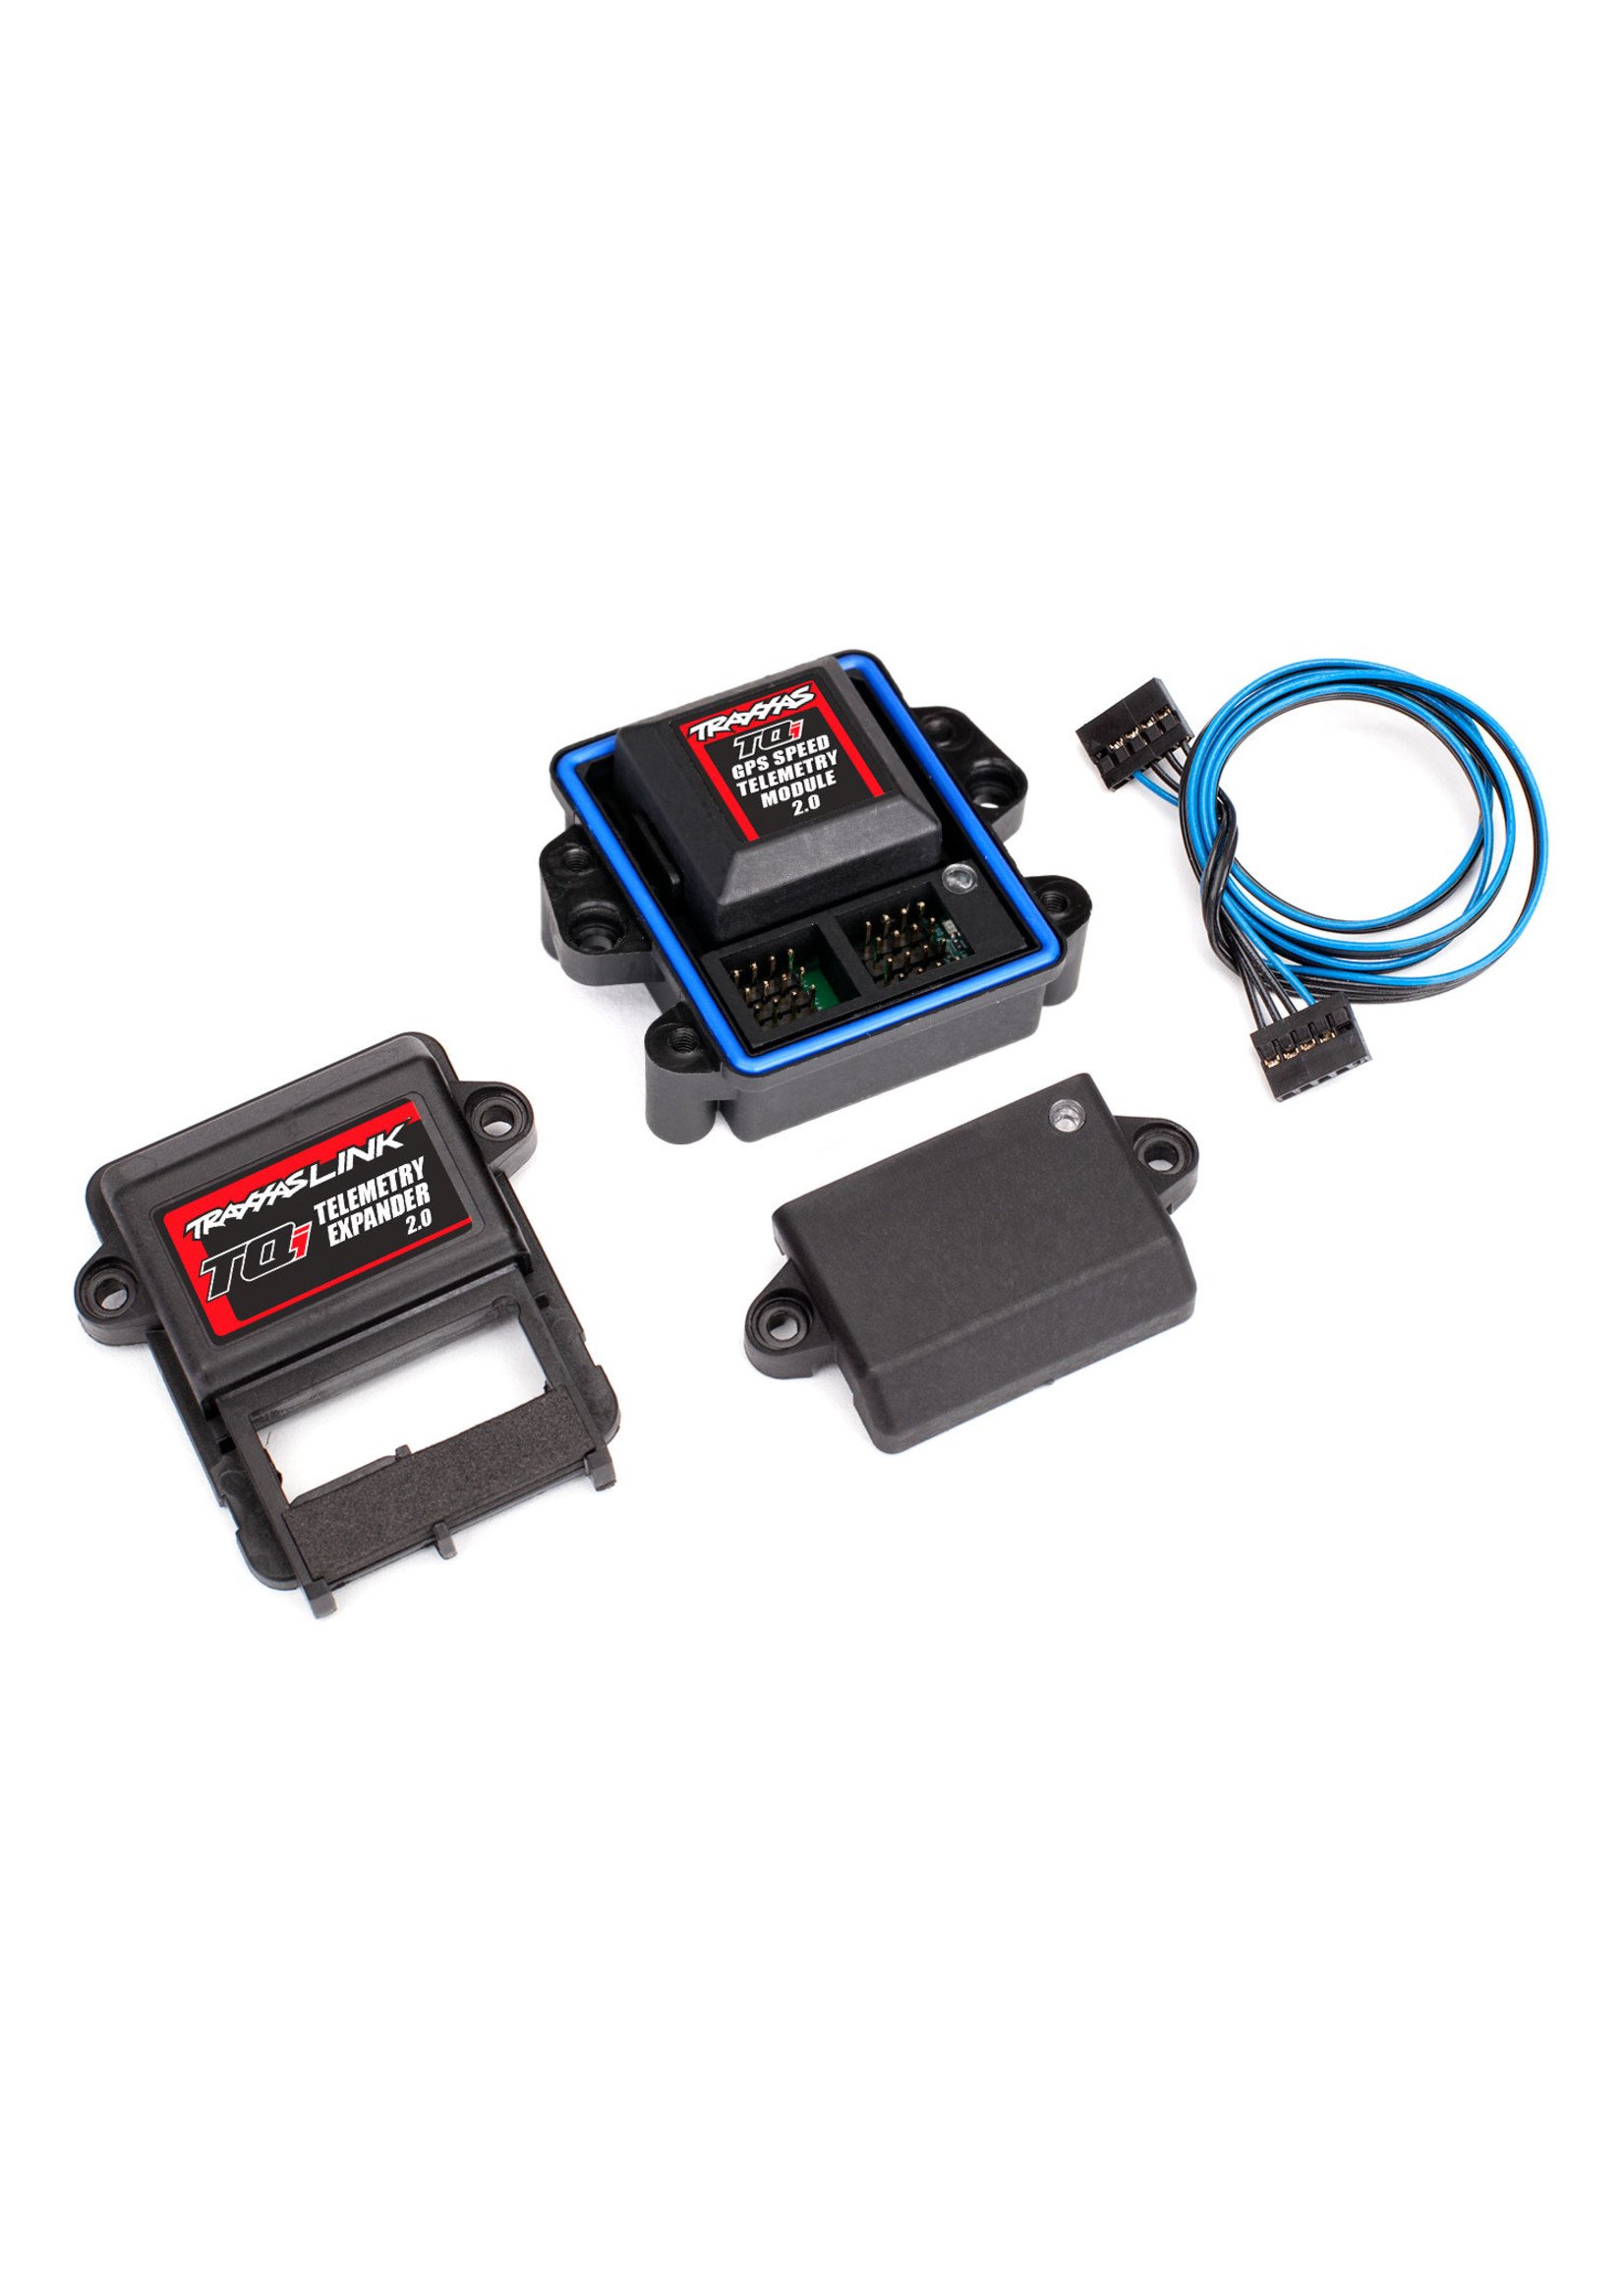 Traxxas 6553X - Telemetry Expander 2.0 and GPS Module 2.0